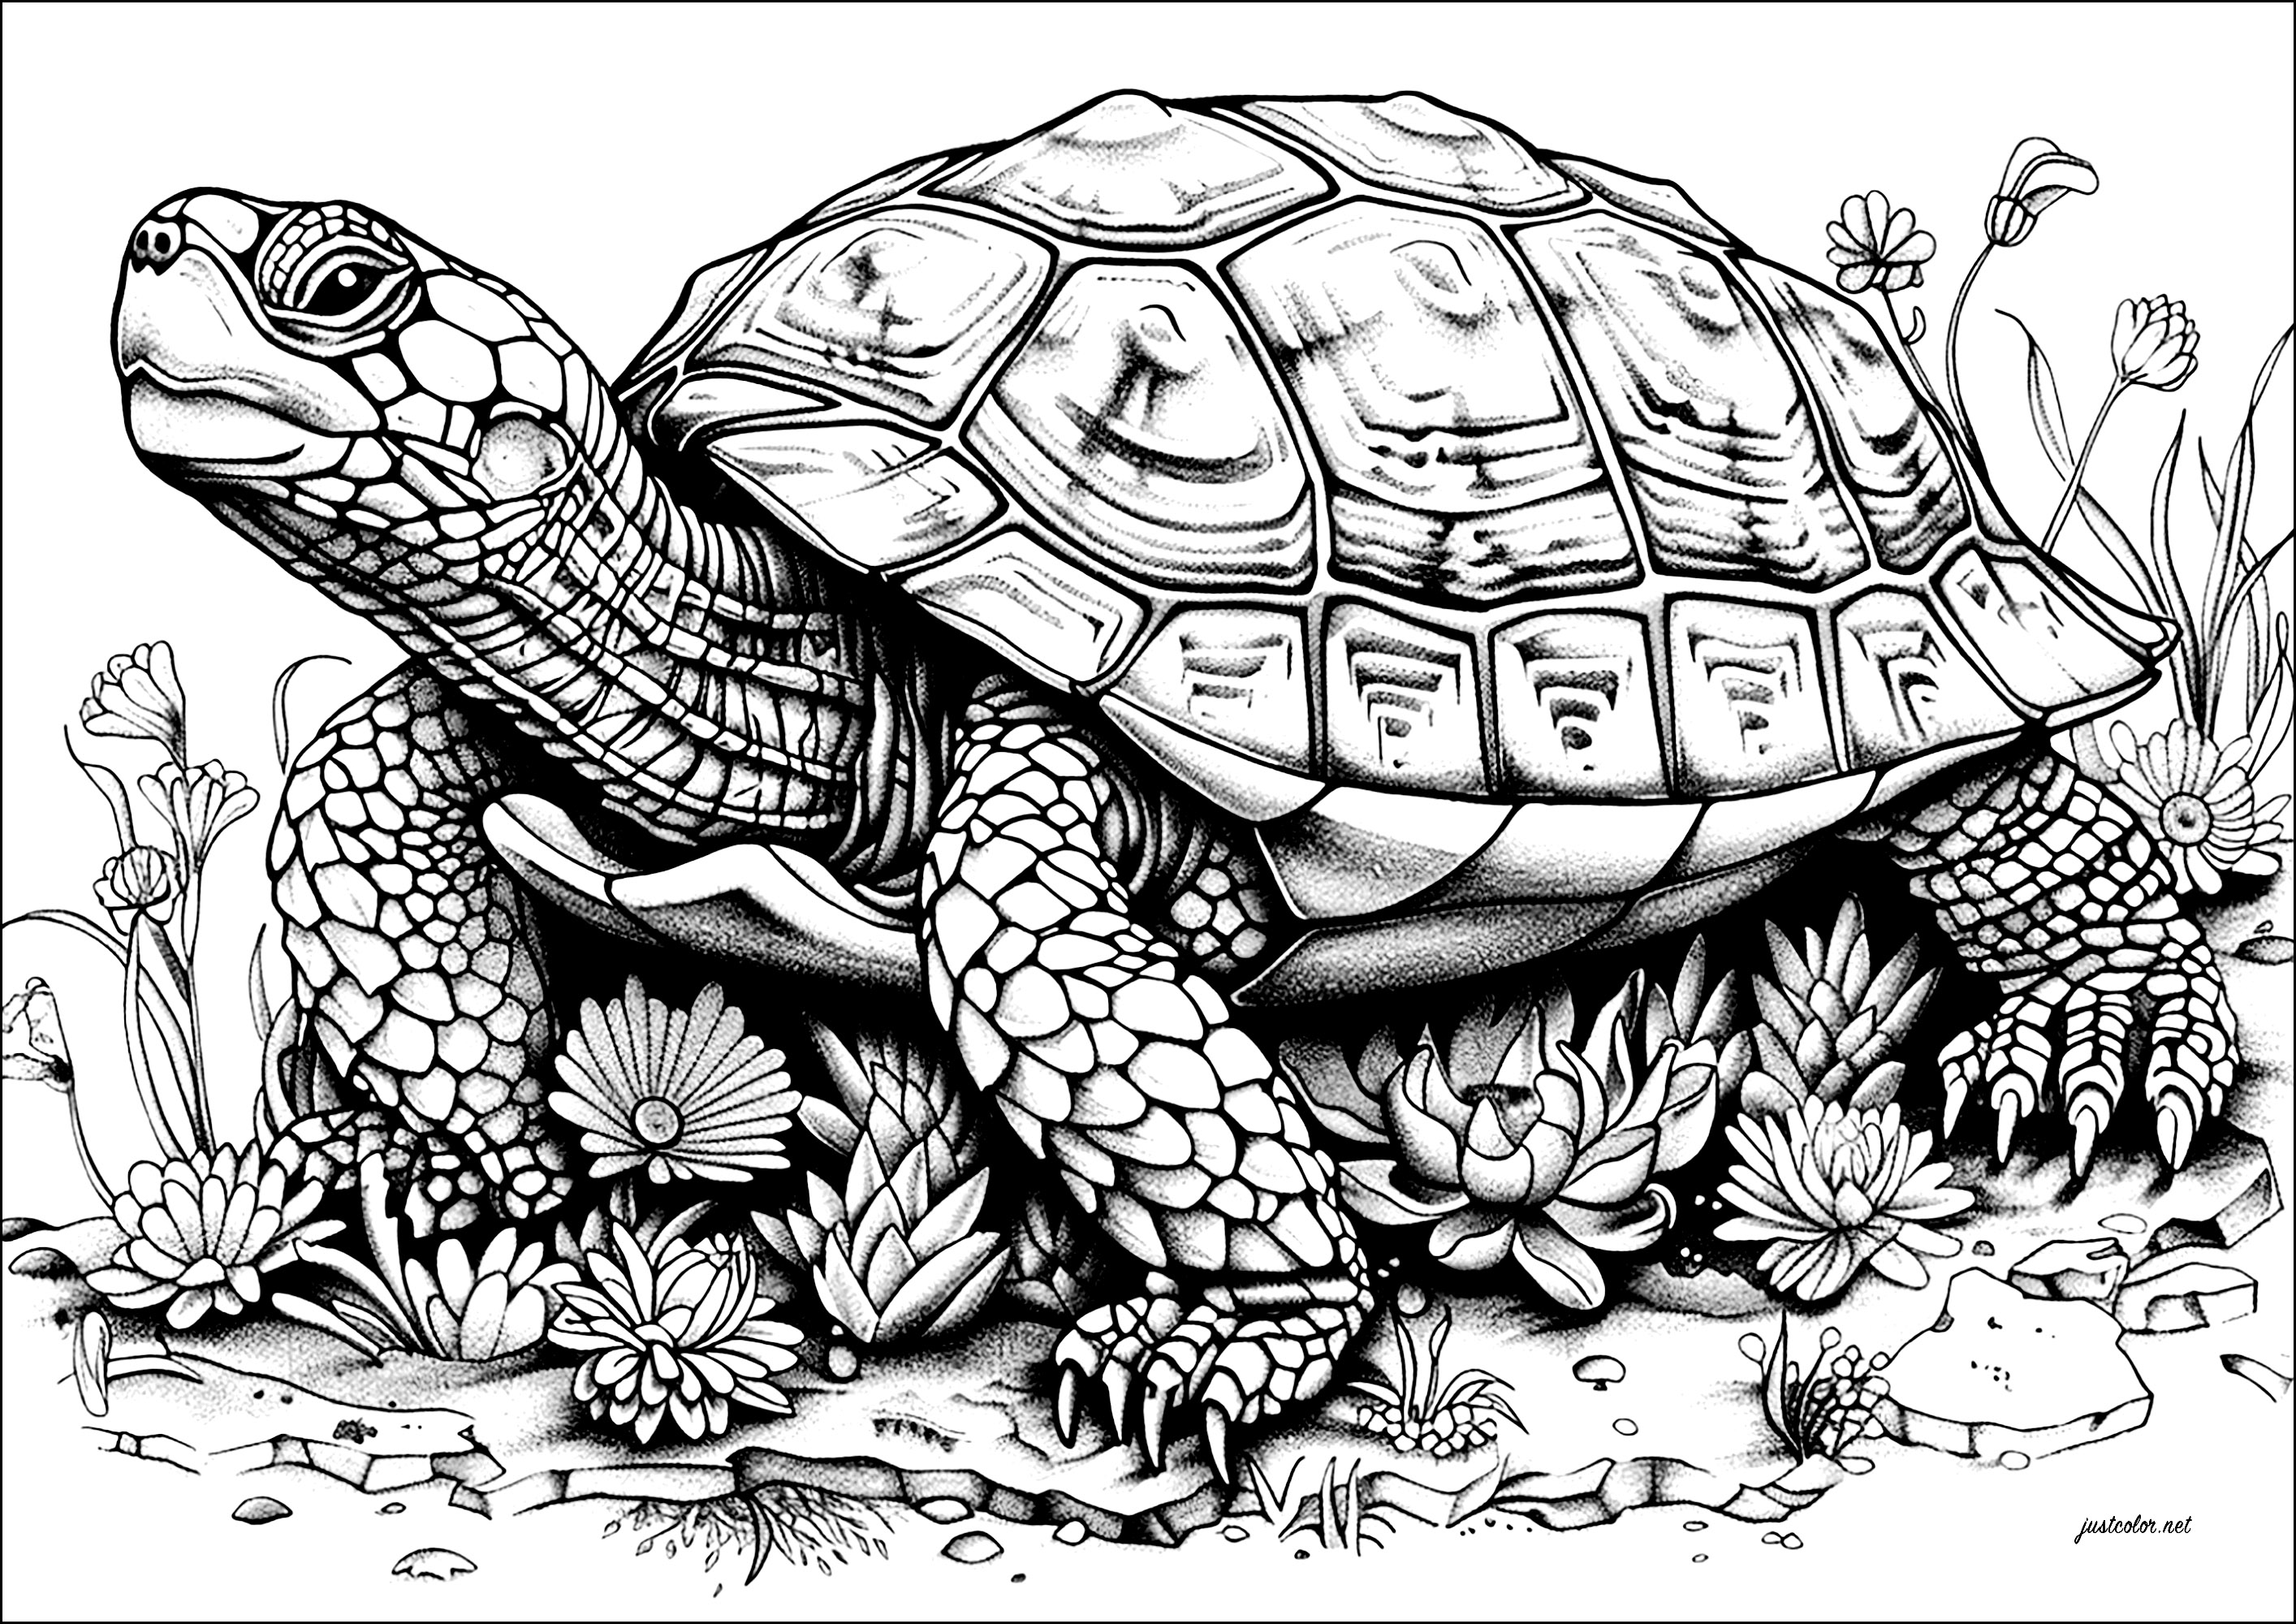 Coloring of a large, slow-moving turtle, full of detail. This turtle's head is topped by an impressive shell, decorated with intricate patterns that you'll enjoy coloring.It moves forward slowly, as if carrying the weight of the world on its back.